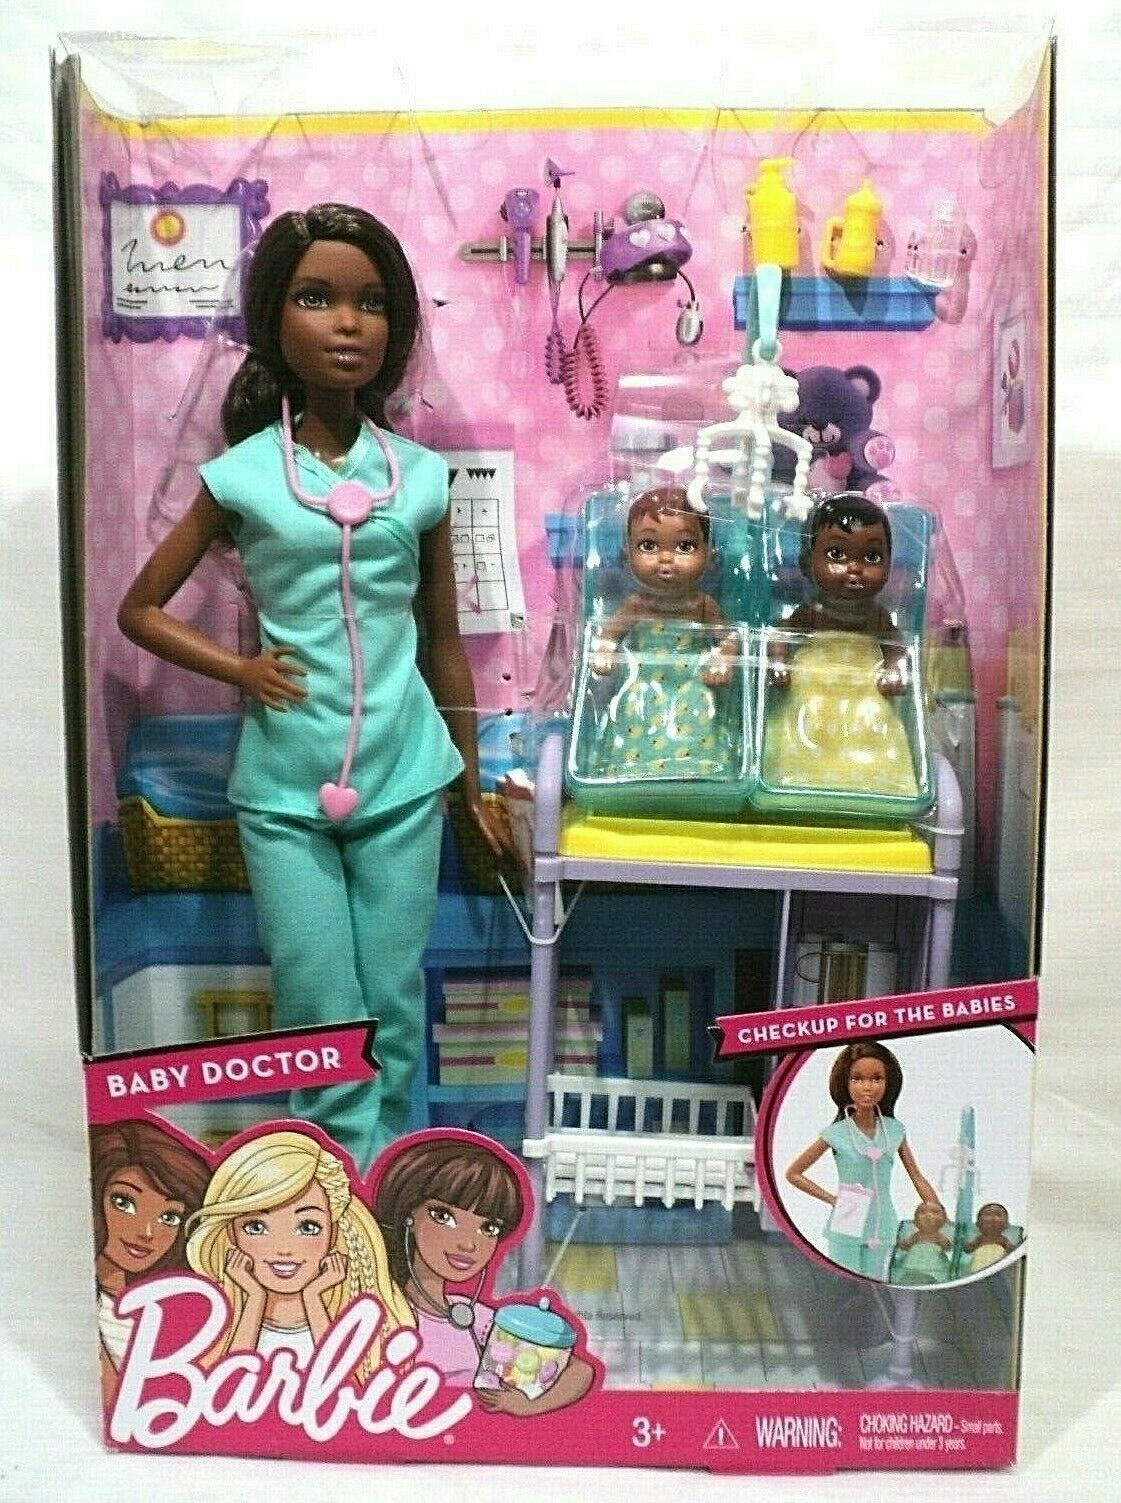 Barbie Career Baby Doctor Checkup For The Babies Dvg12 Bnib